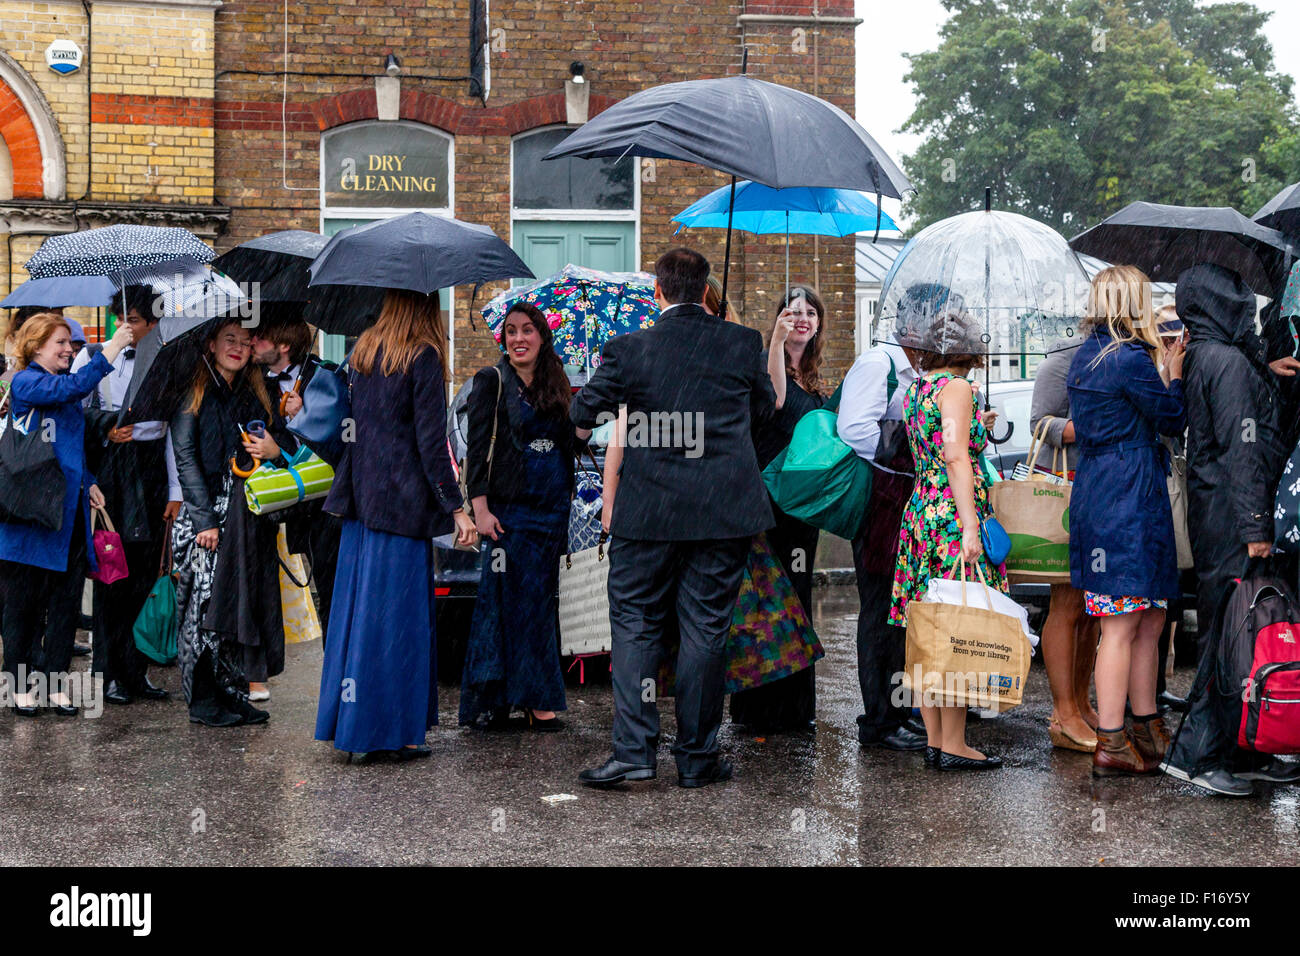 Young Opera Fans Wait In The Pouring Rain At Lewes Station For A Bus Take Them To Glyndebourne Opera House, Lewes, Sussex, UK Stock Photo